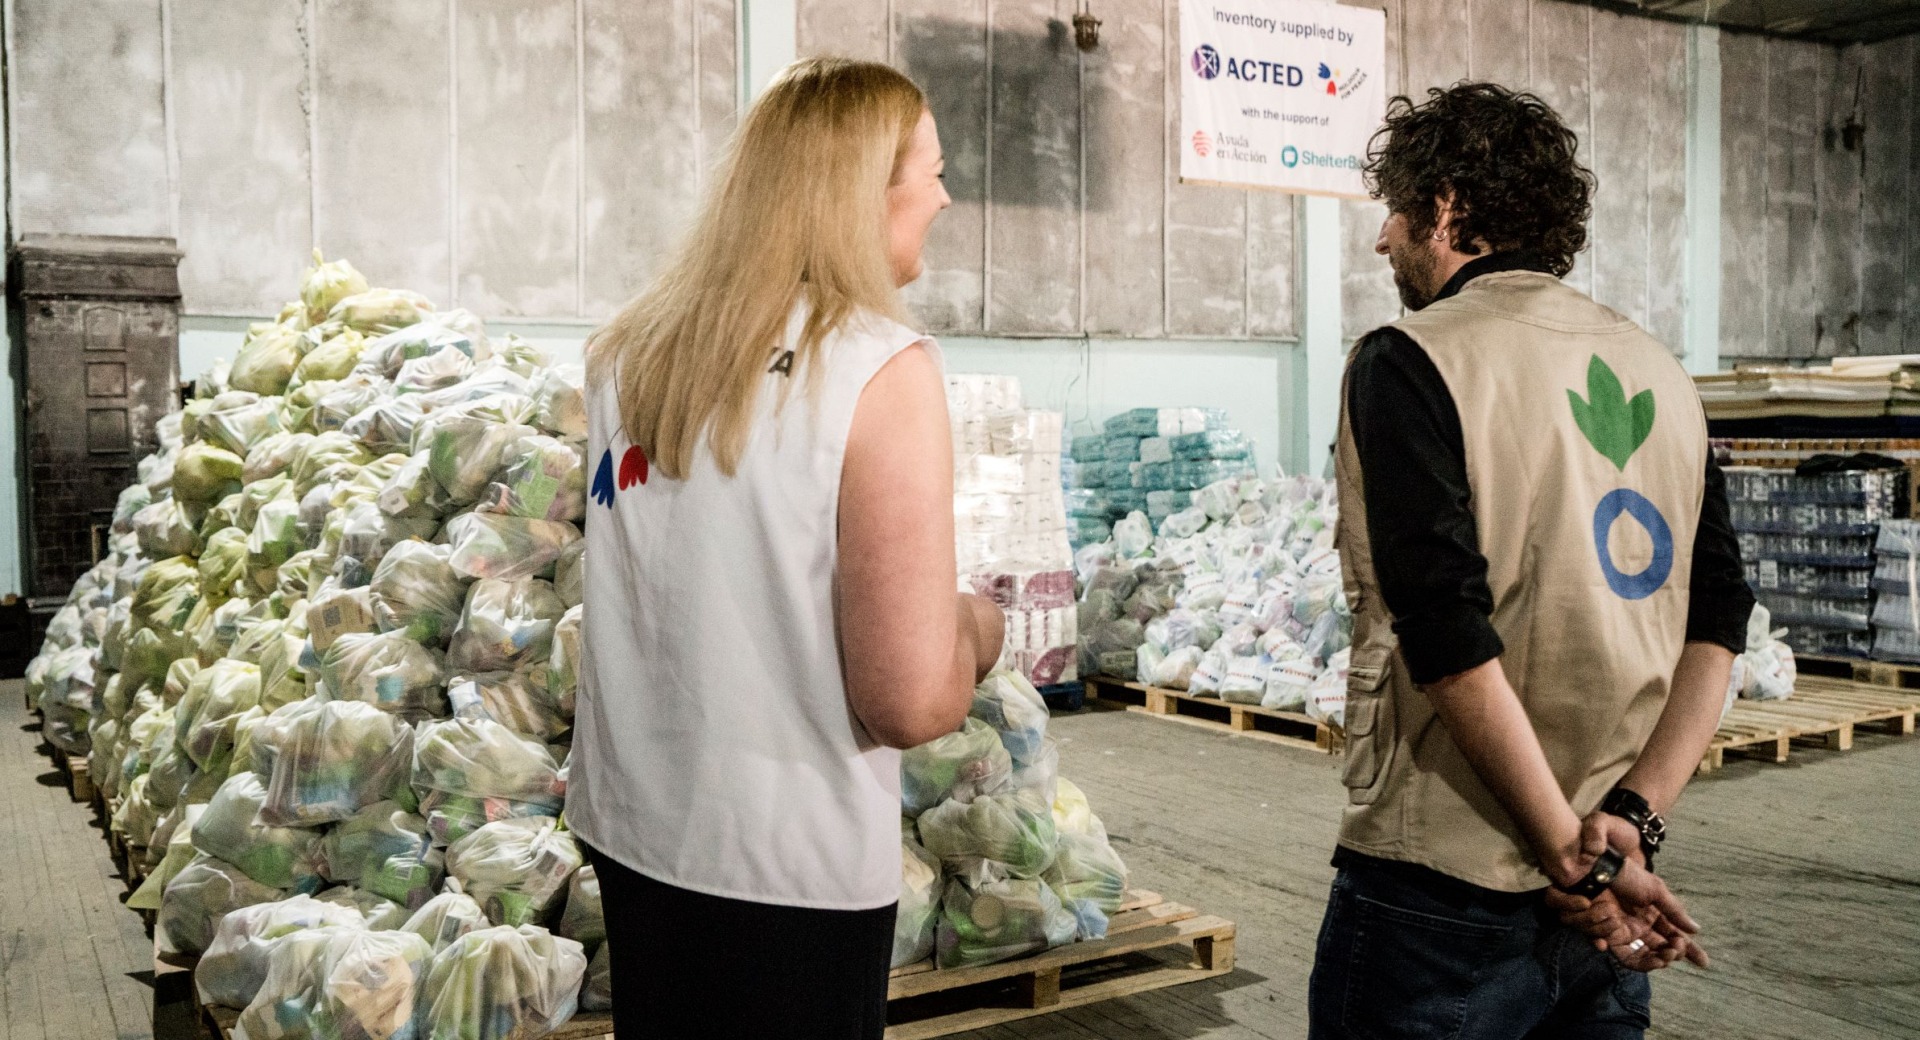 Two aid workers in a warehouse full of emergency supplies to help Ukrainian refugees.